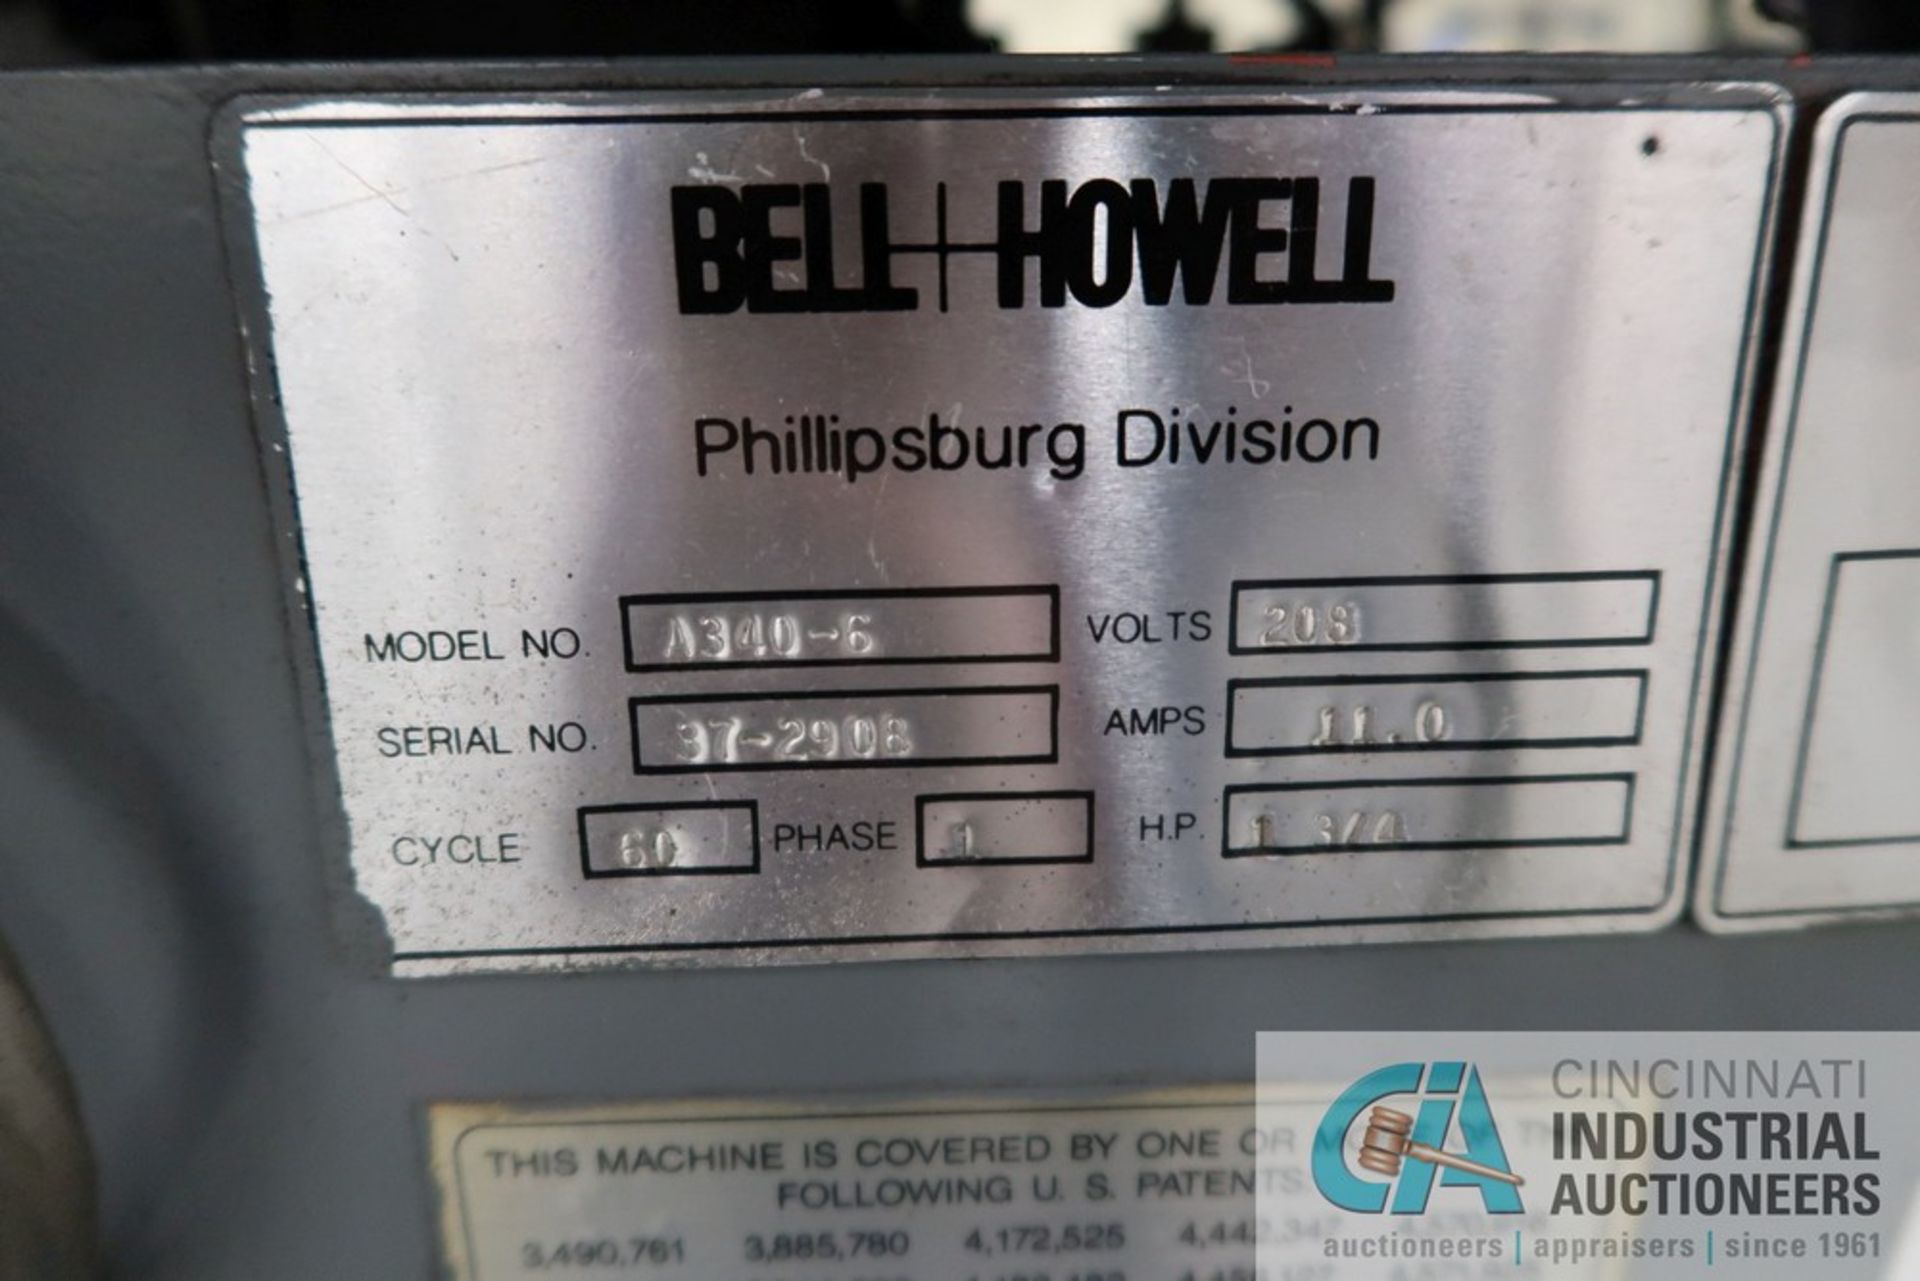 BELL & HOWELL MODEL A340-6 SIX-POCKET INSERTER WITH STREAM FEEDER; S/N 37-2908 - Image 6 of 6